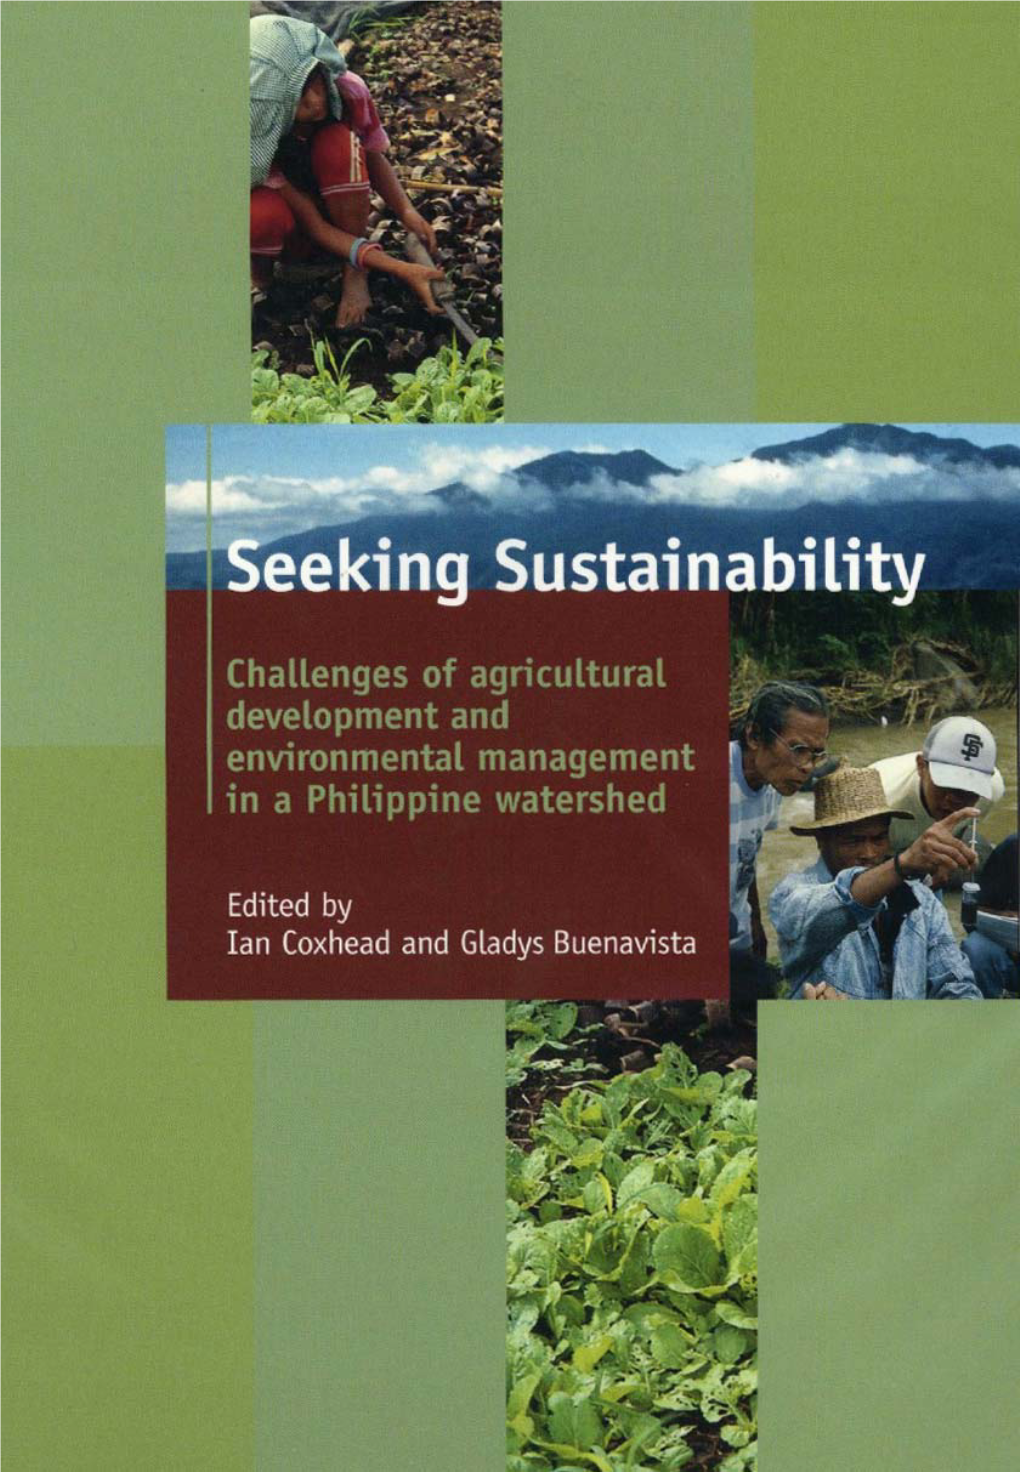 Seeking Sustainability: Challenges of Agricultural Development and Environmental Management in a Philippine Watershed